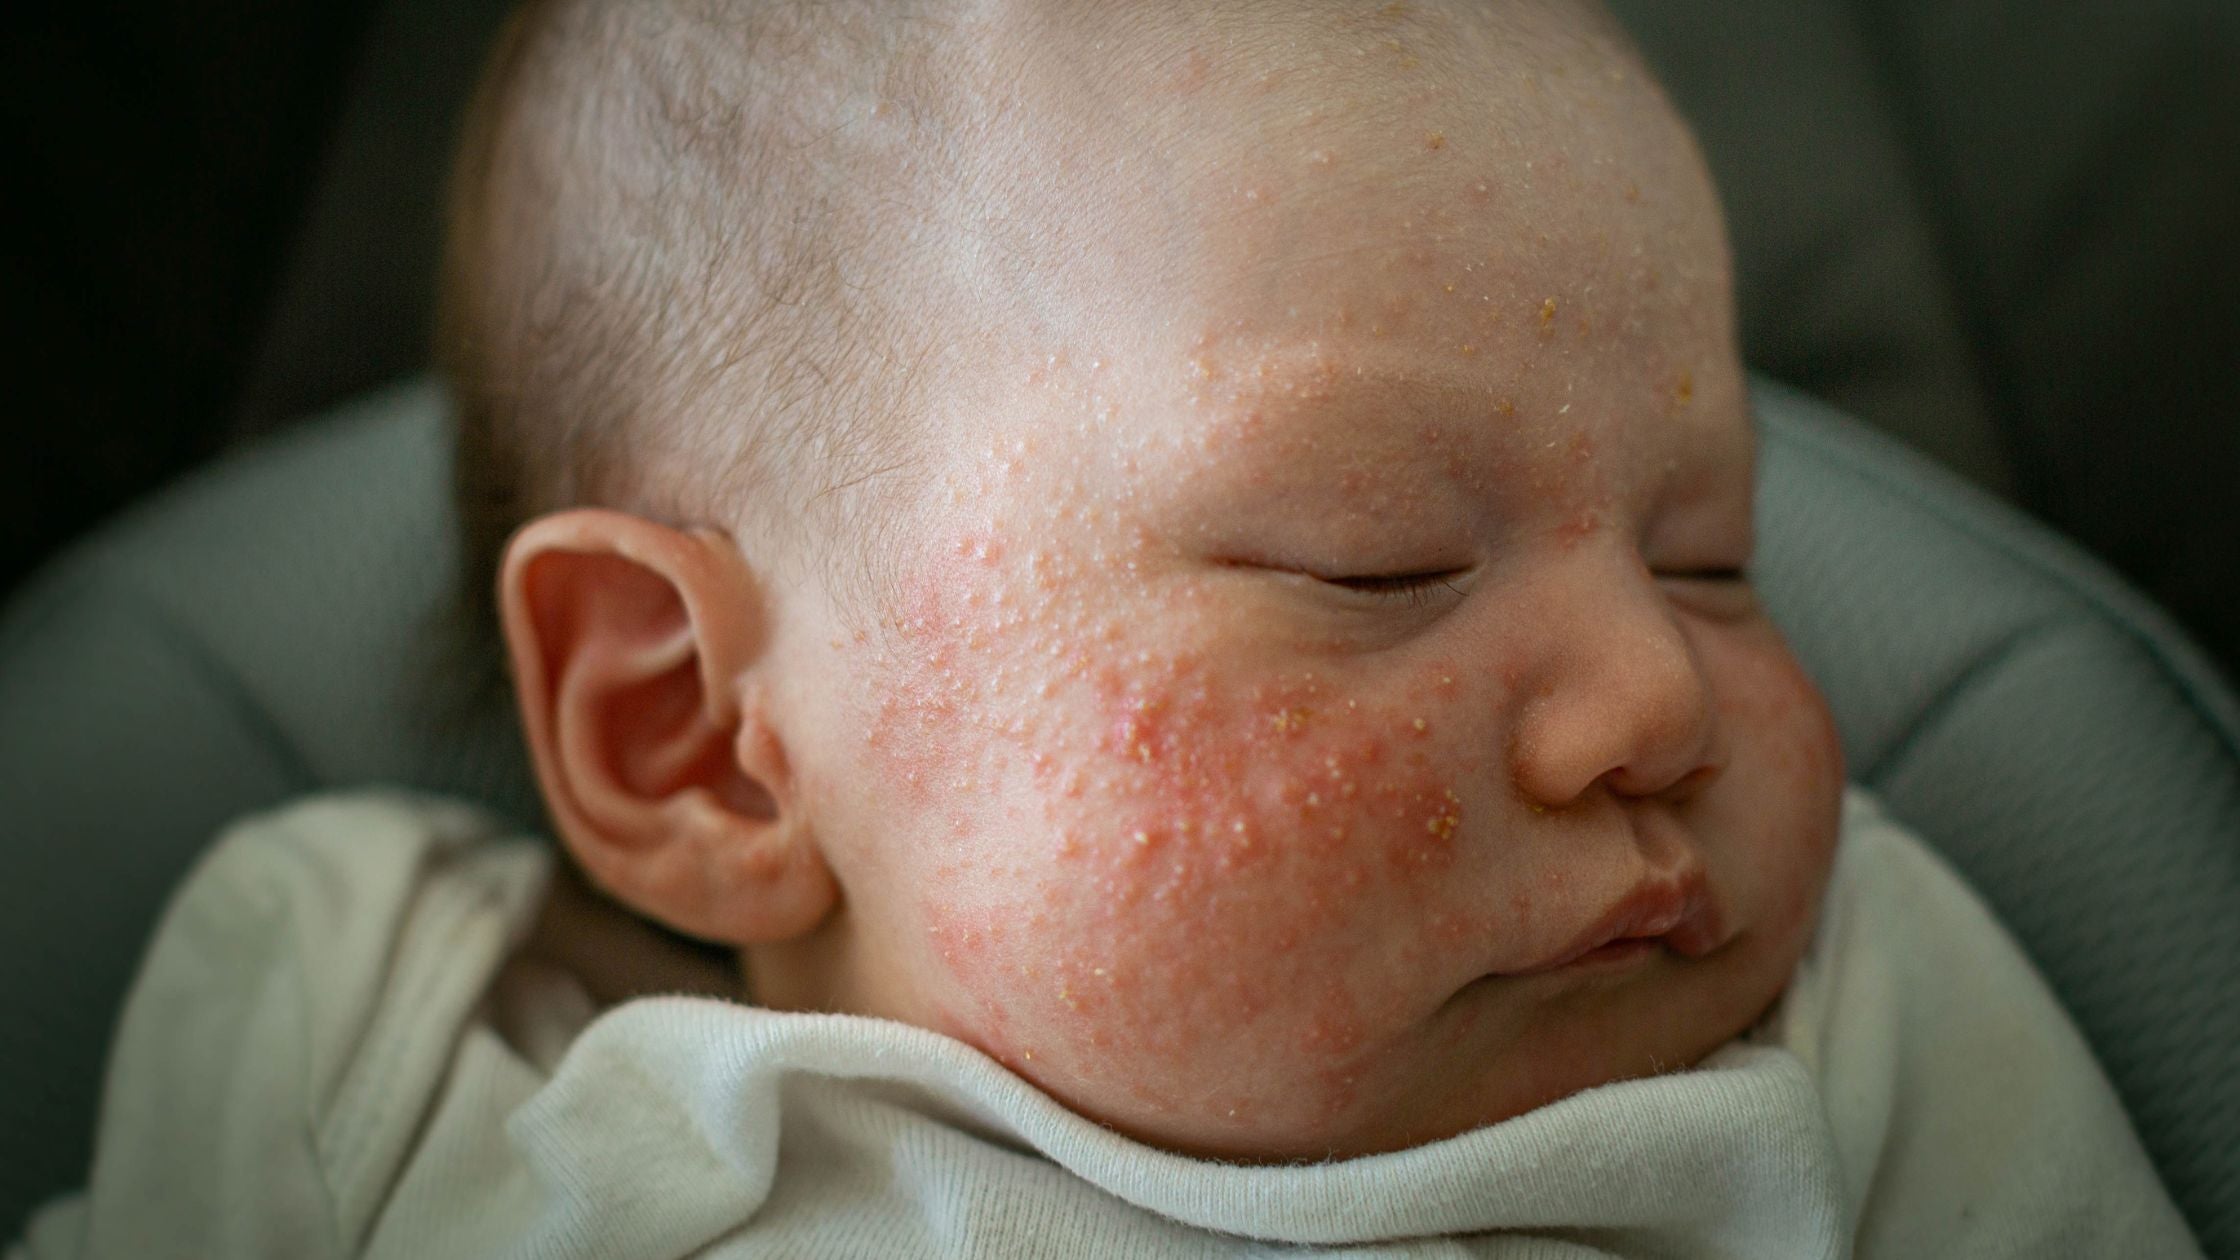 My Child Has Baby Acne – What Is It and How Do I Help It?